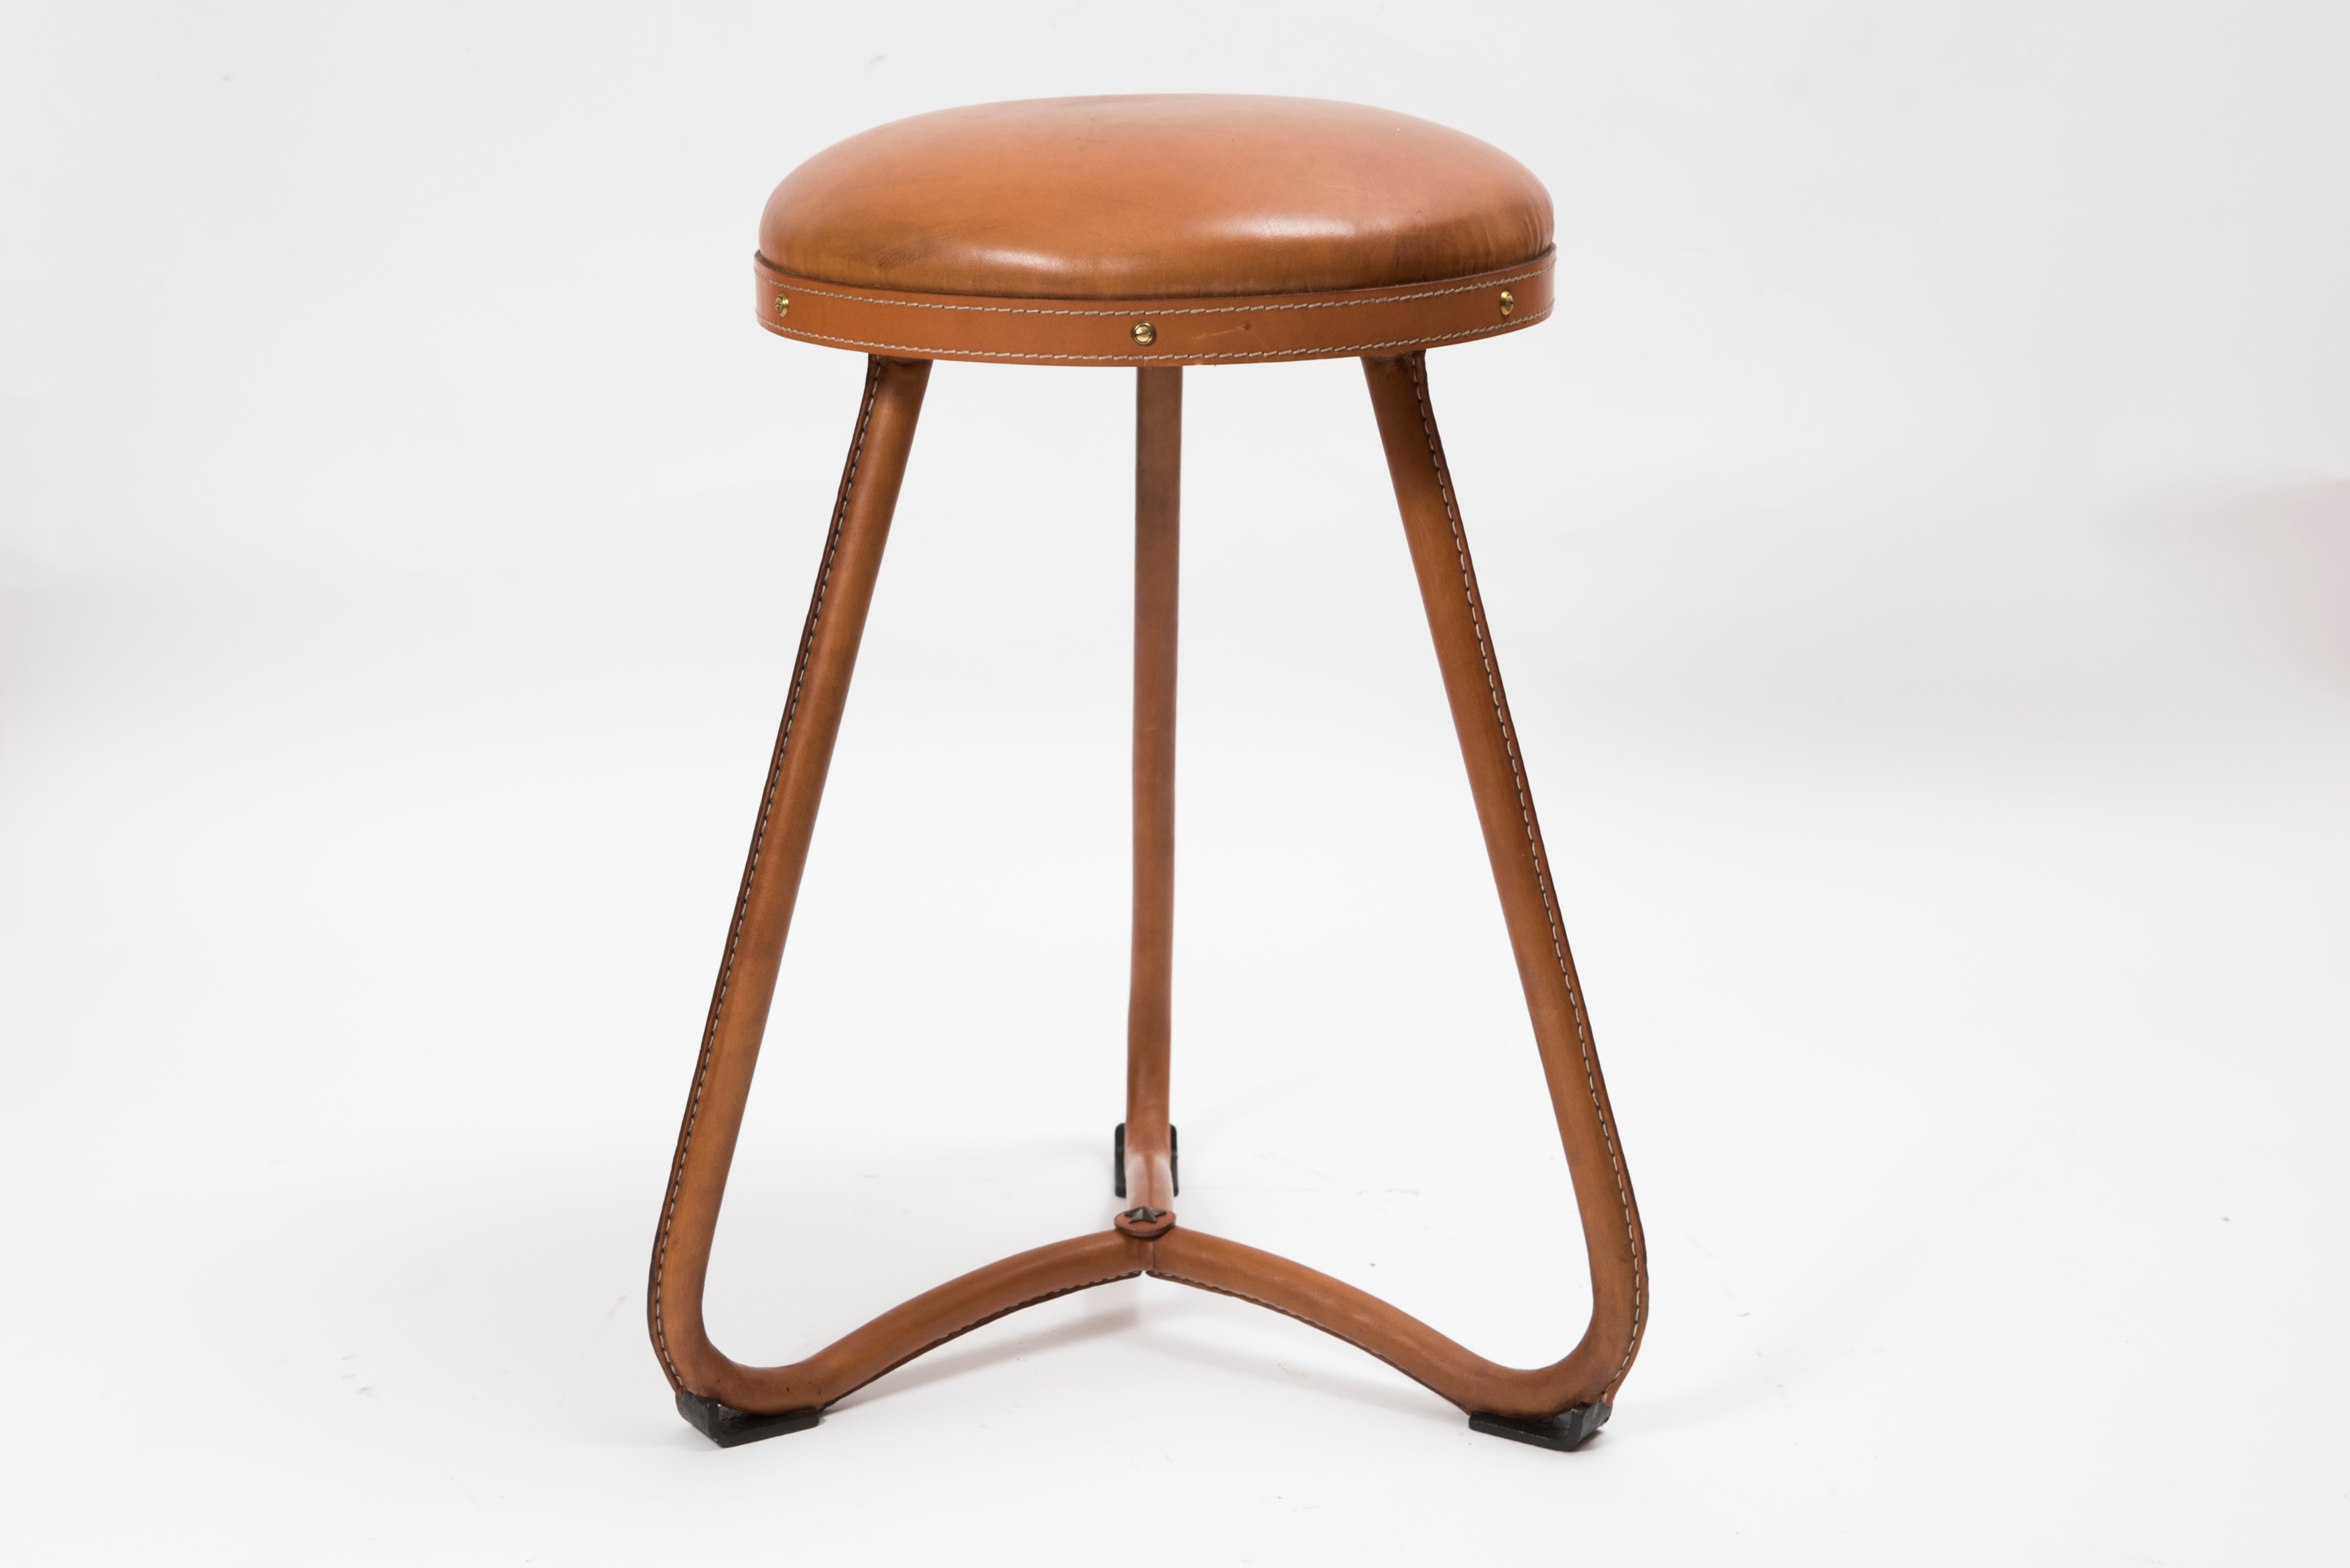 Pair of 1950s Stitched Leather Stools by Jacques Adnet In Good Condition For Sale In Bois-Colombes, FR